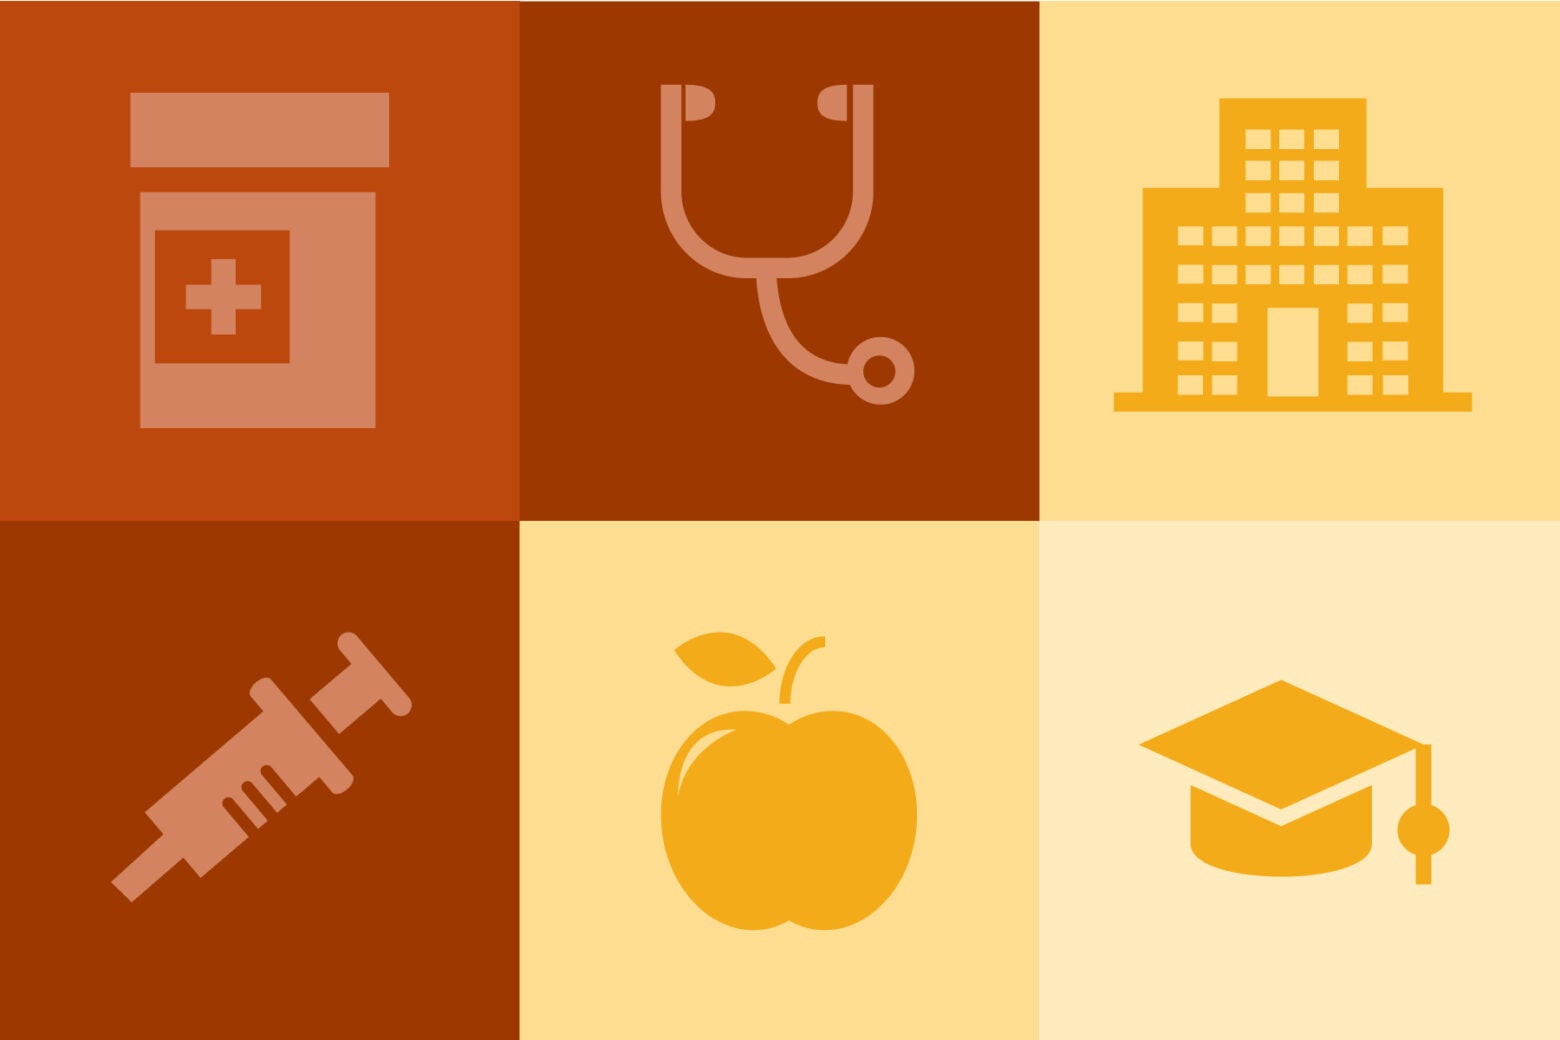 Orange and yellow grid of six medical and public health icons: pill bottle, stethoscope, apartment building, graduation cap, apple, syringe